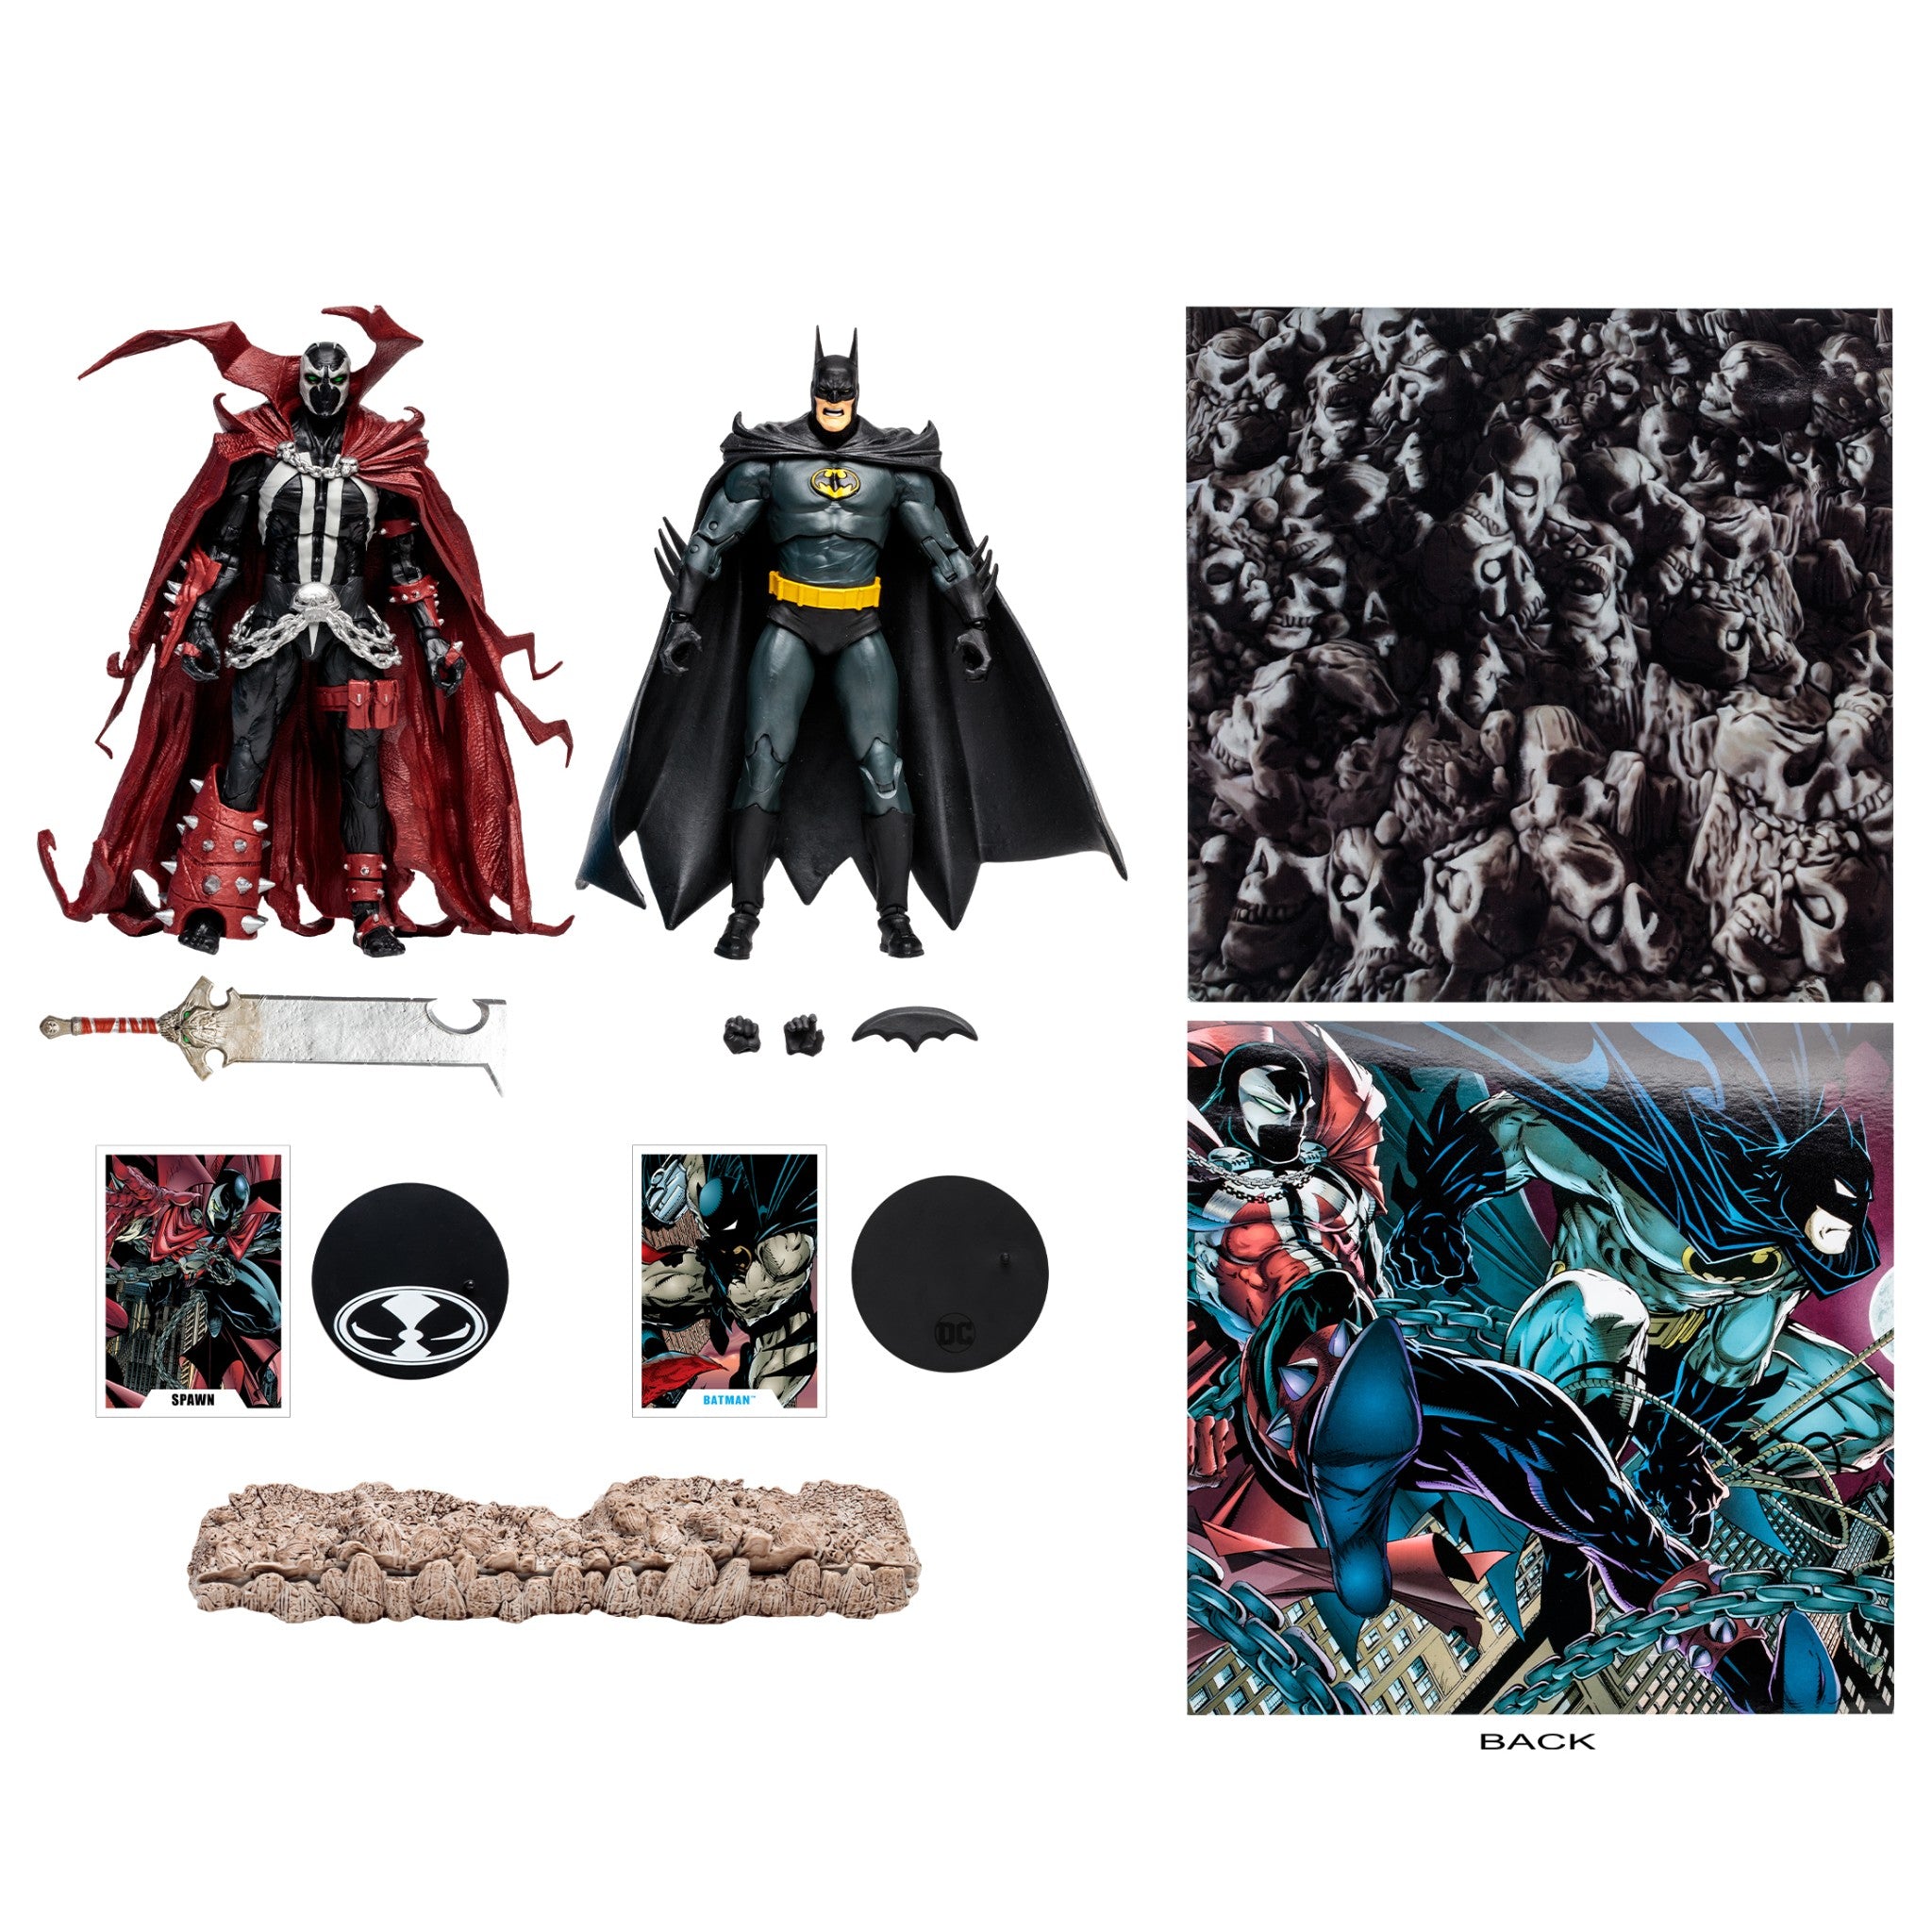 DC Multiverse Batman & Spawn 2 Pack Based on Comics by Todd McFarlane Toys - 0